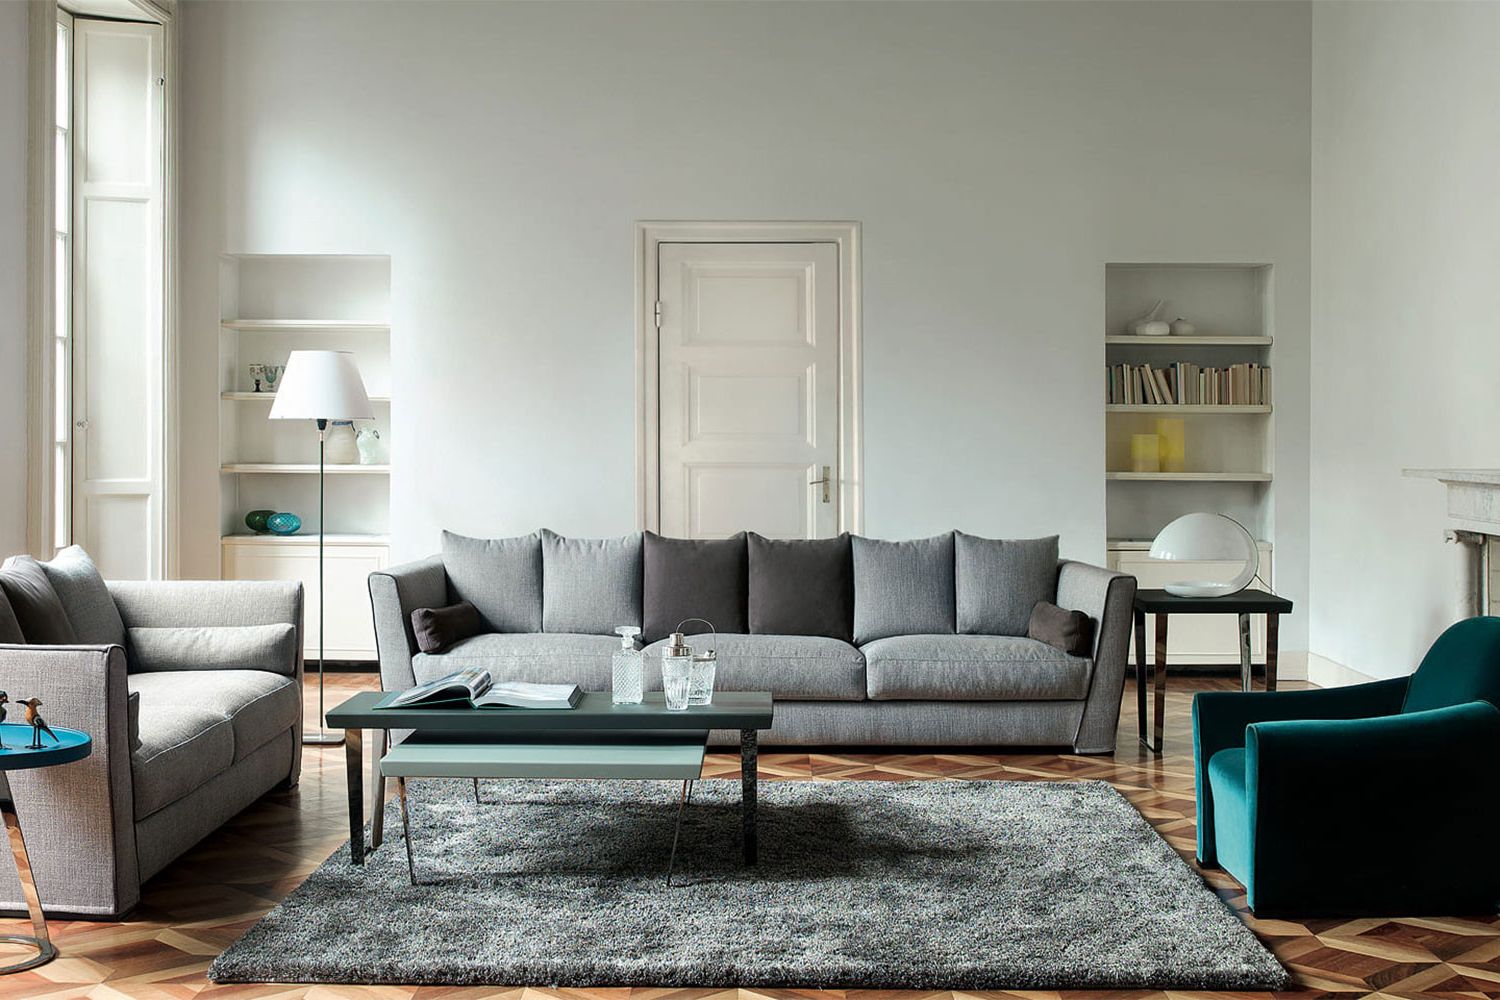 2, 3 Or 4 Seater Pillow Back Sofa Quentin | Bodema Throughout Pillowback Sofa Sectionals (View 10 of 20)